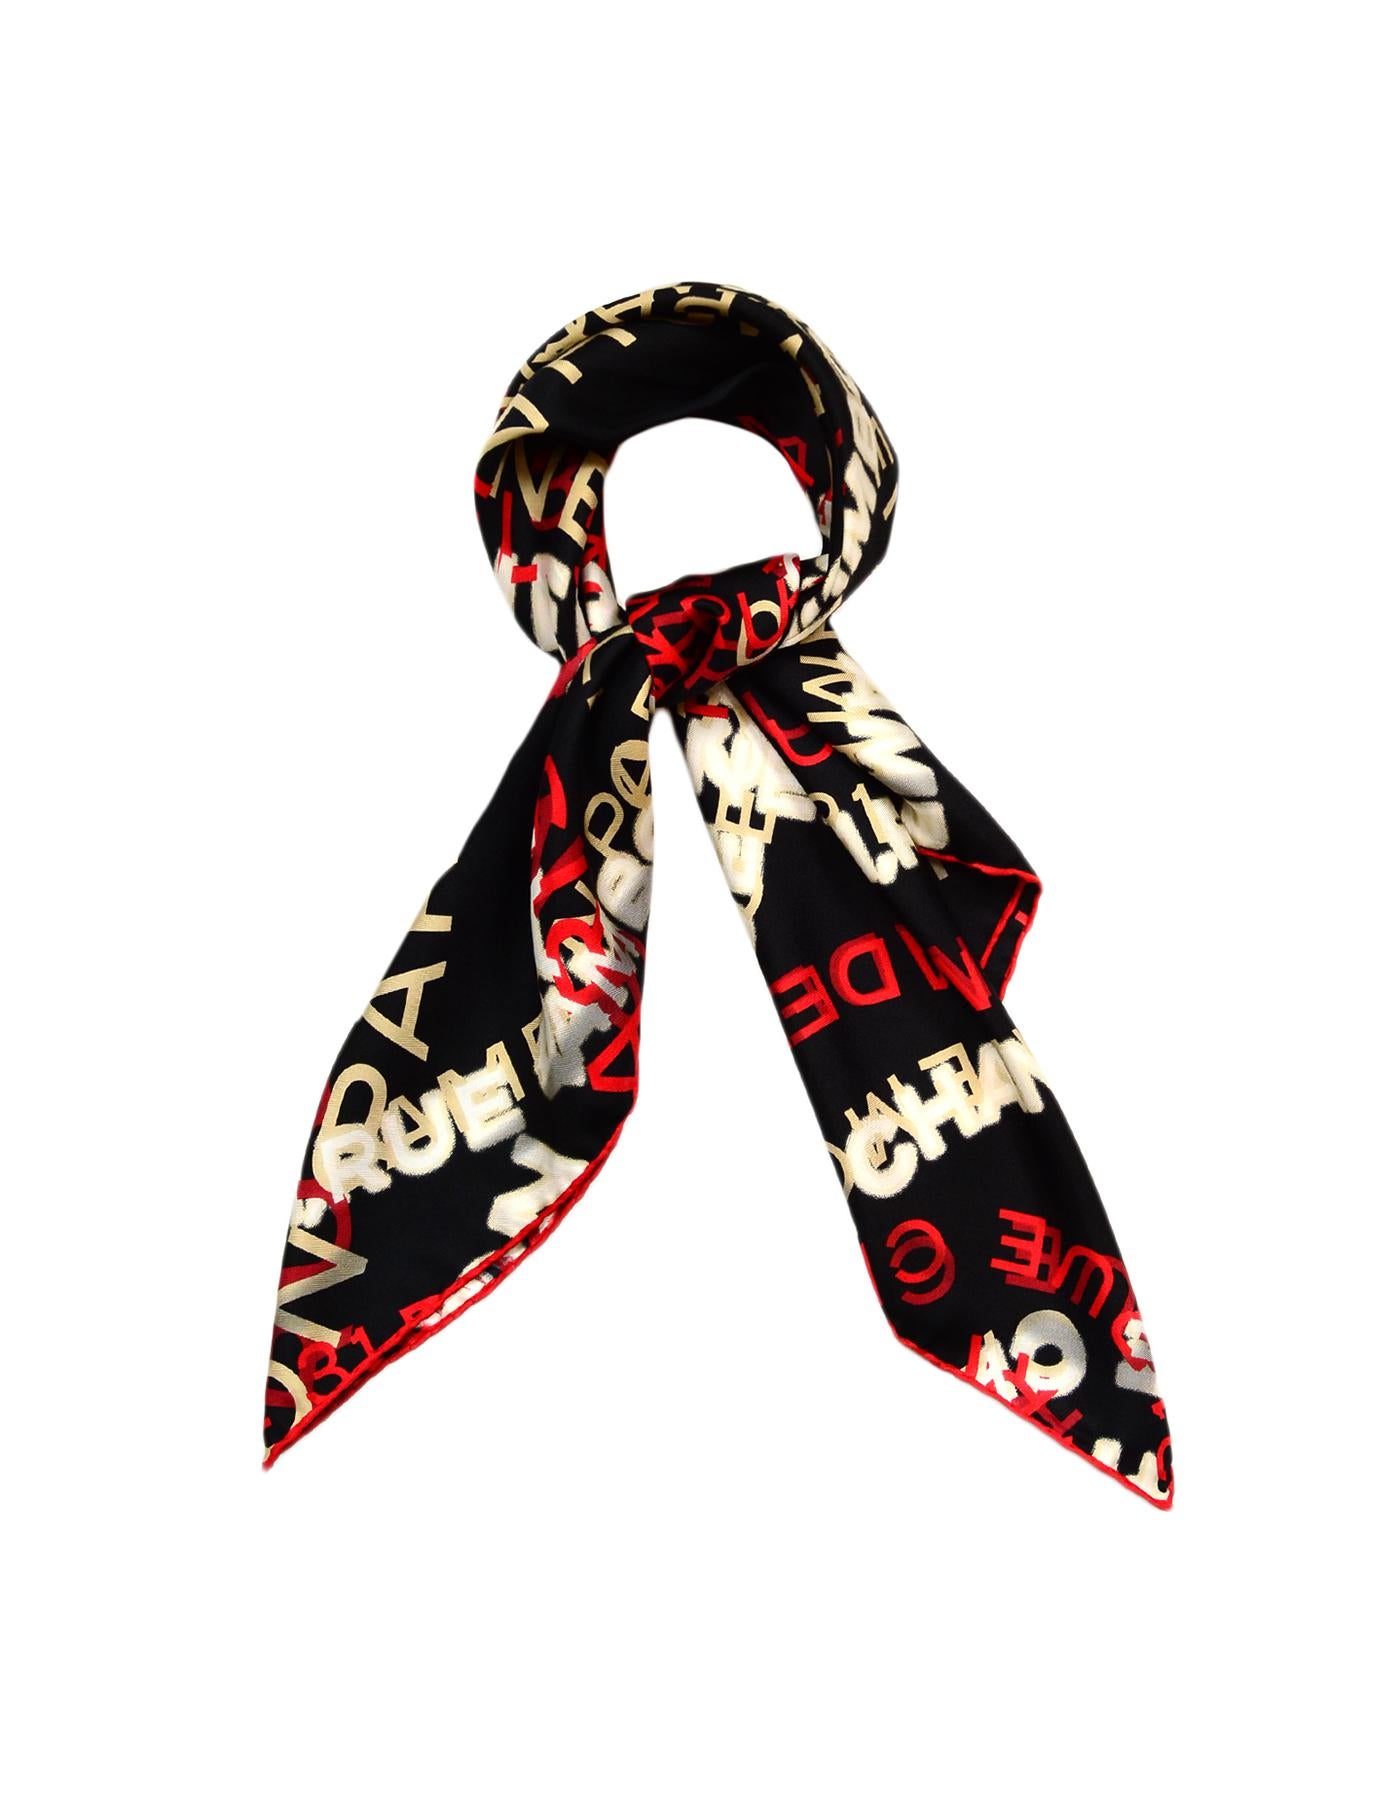 Chanel Red & White w/ Black Background Silk Scarf

Made In: Italy
Color: Red, White, Black
Materials: 100% Silk
Overall Condition: Excellent pre-owned condition

Measurements: 
34